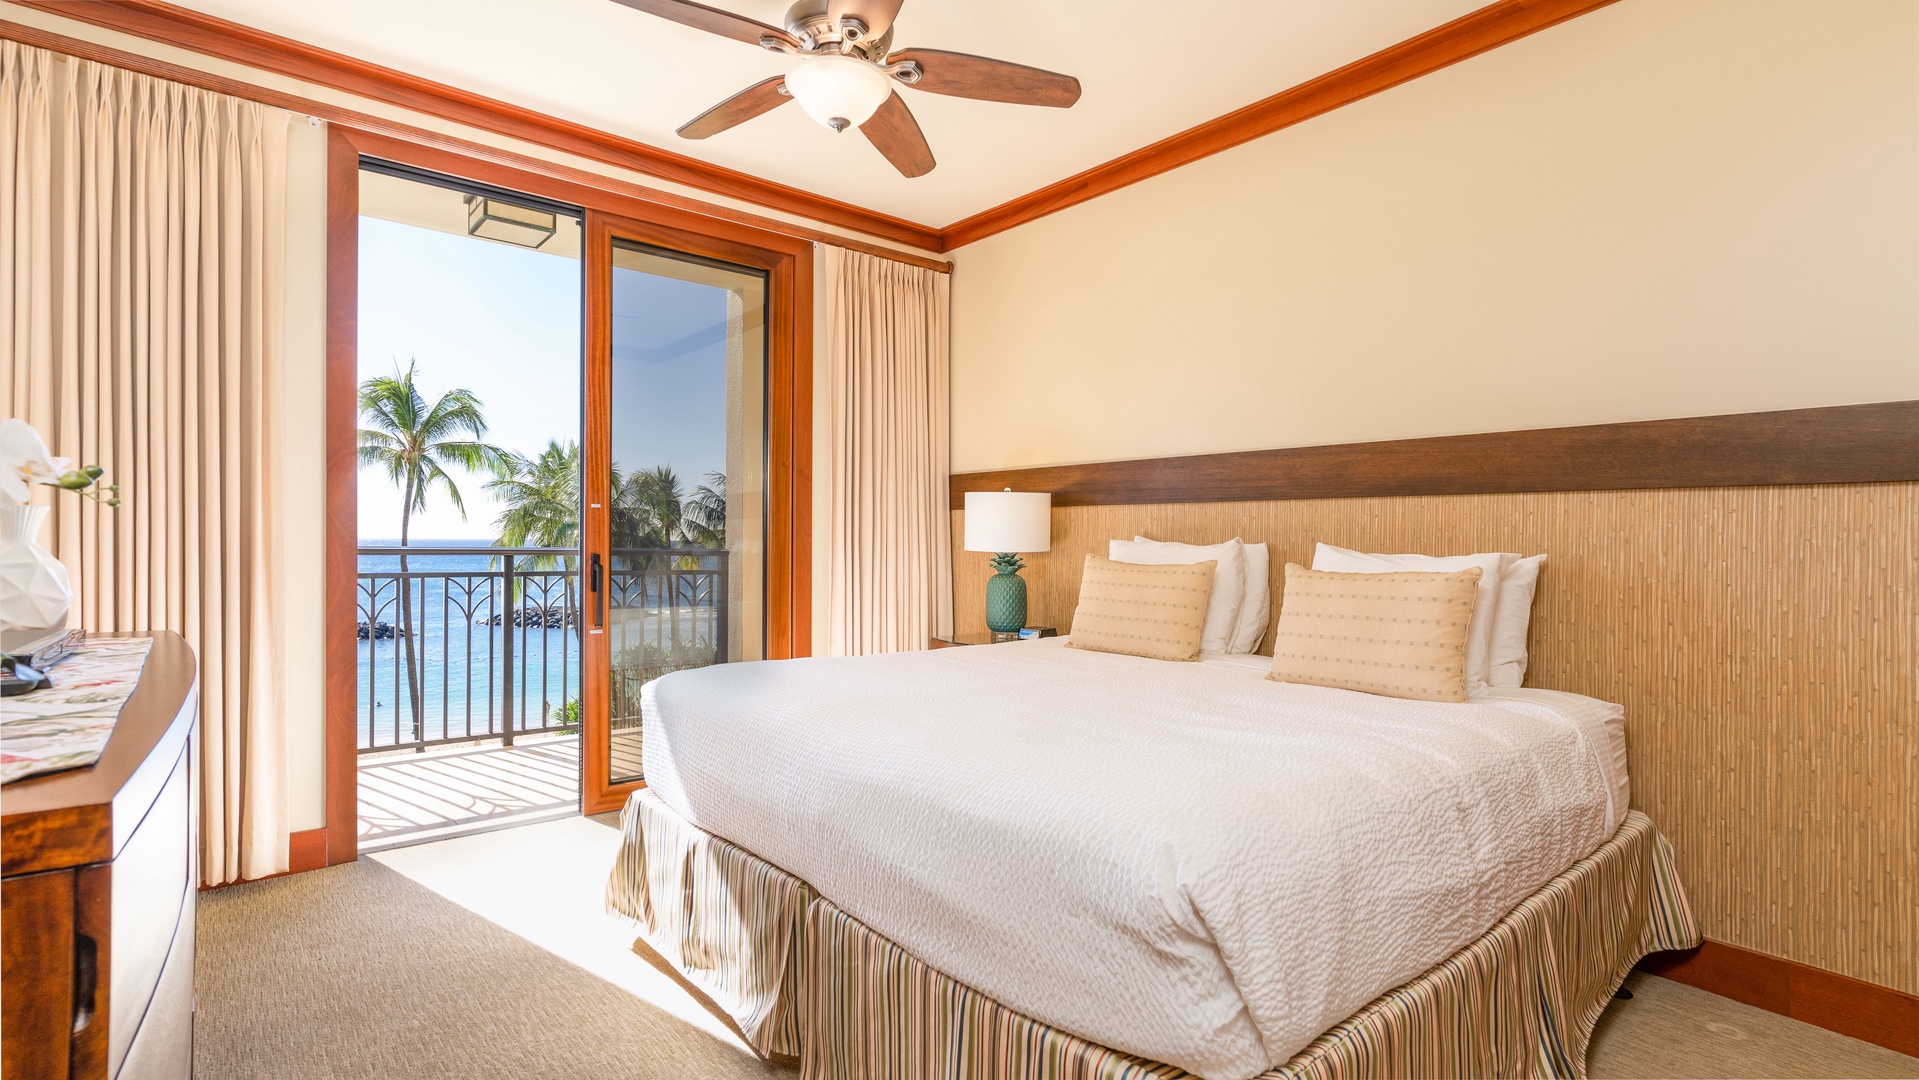 Kapolei Vacation Rentals, Ko Olina Beach Villas B309 - The second bedroom has extra long twin beds that can be converted into a king bed.